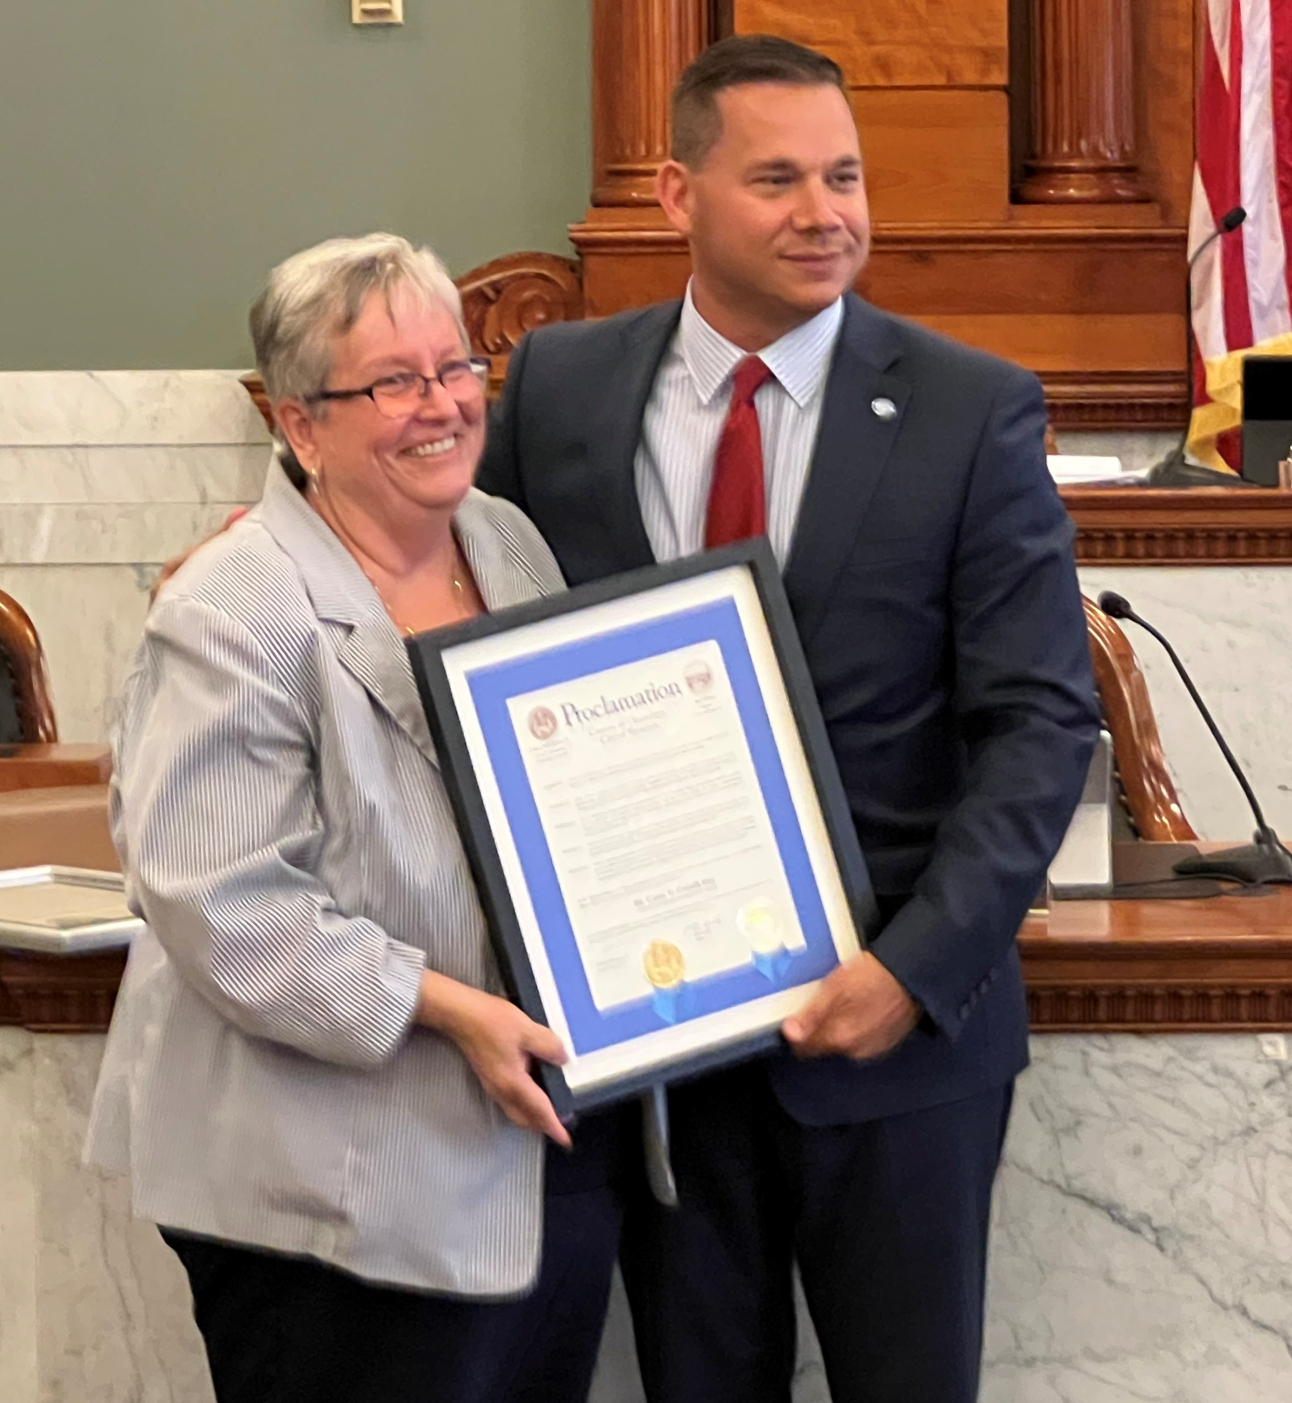 Onondaga County Executive J. Ryan McMahon (right) presented Dr. Casey Crabill (left) with a proclamation, declaring June 8 "Casey Crabill Day" in Onondaga County and the City of Syracuse.